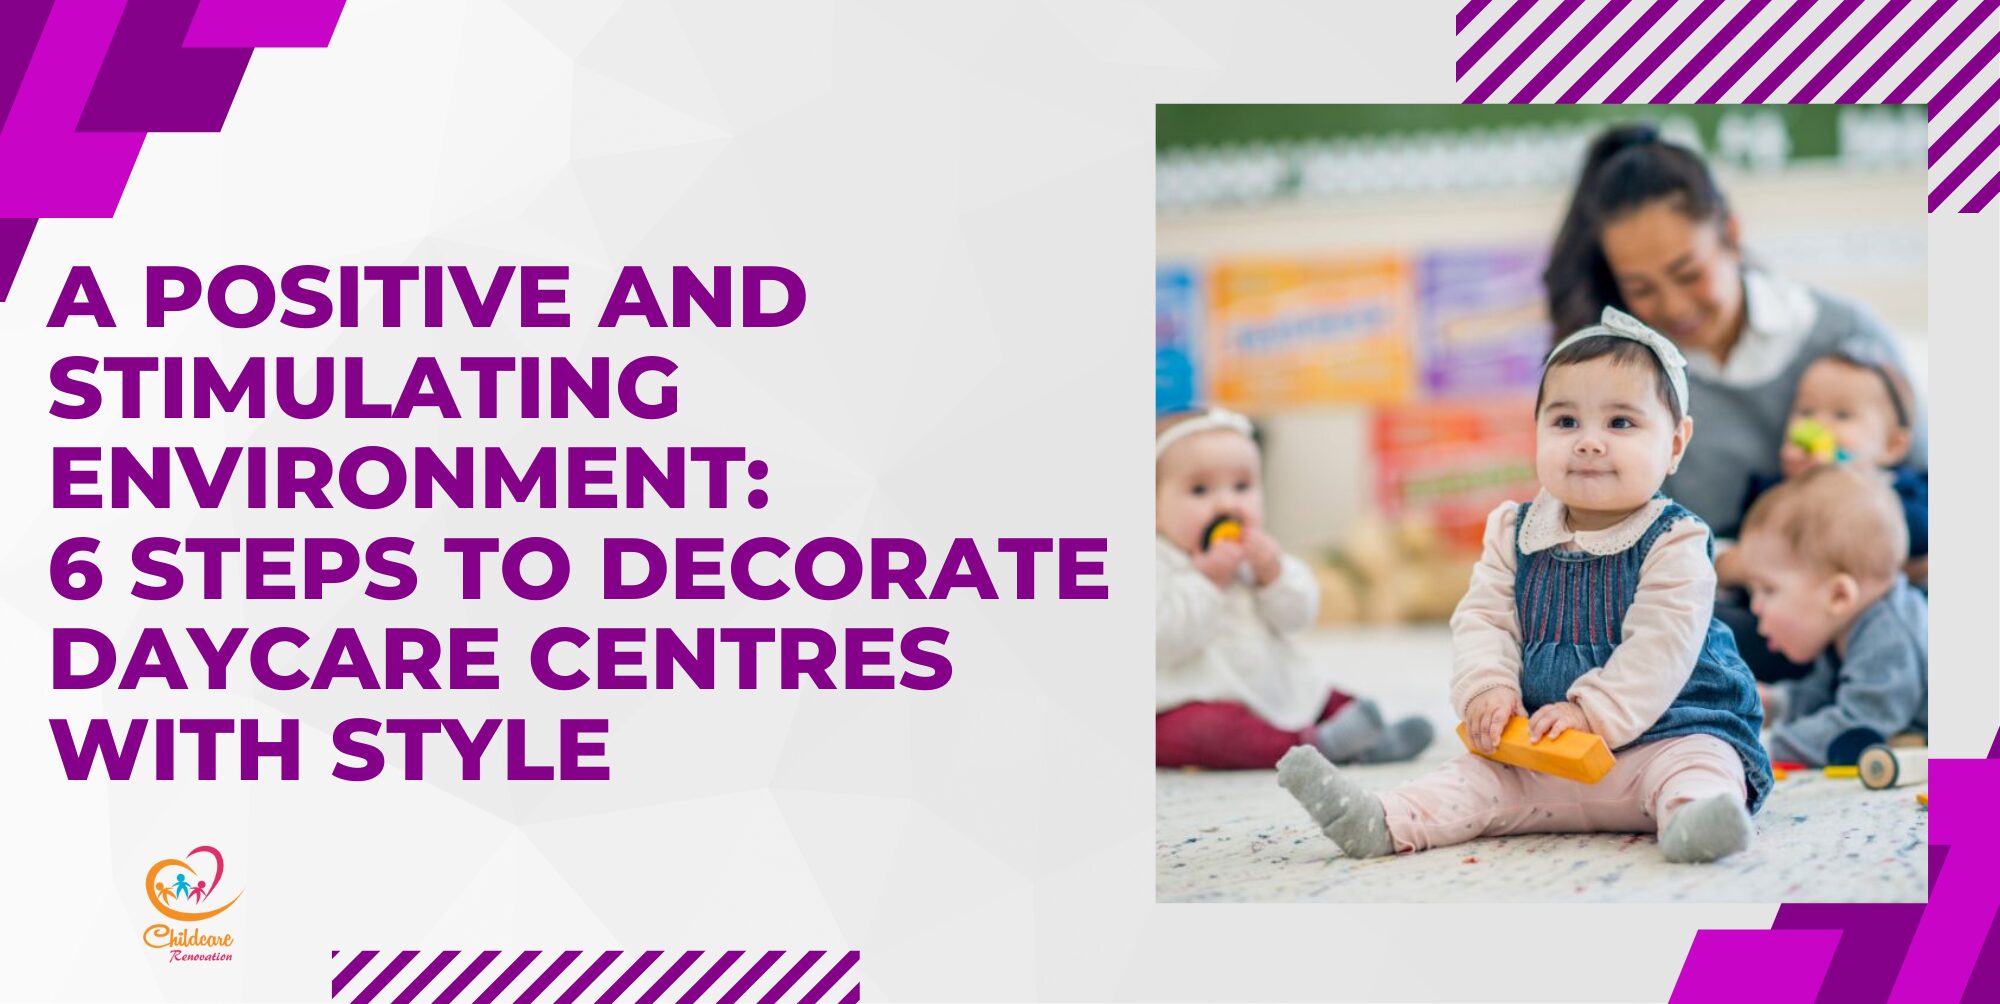 A Positive and Stimulating Environment: 6 Steps to Decorate Daycare Centres with Style